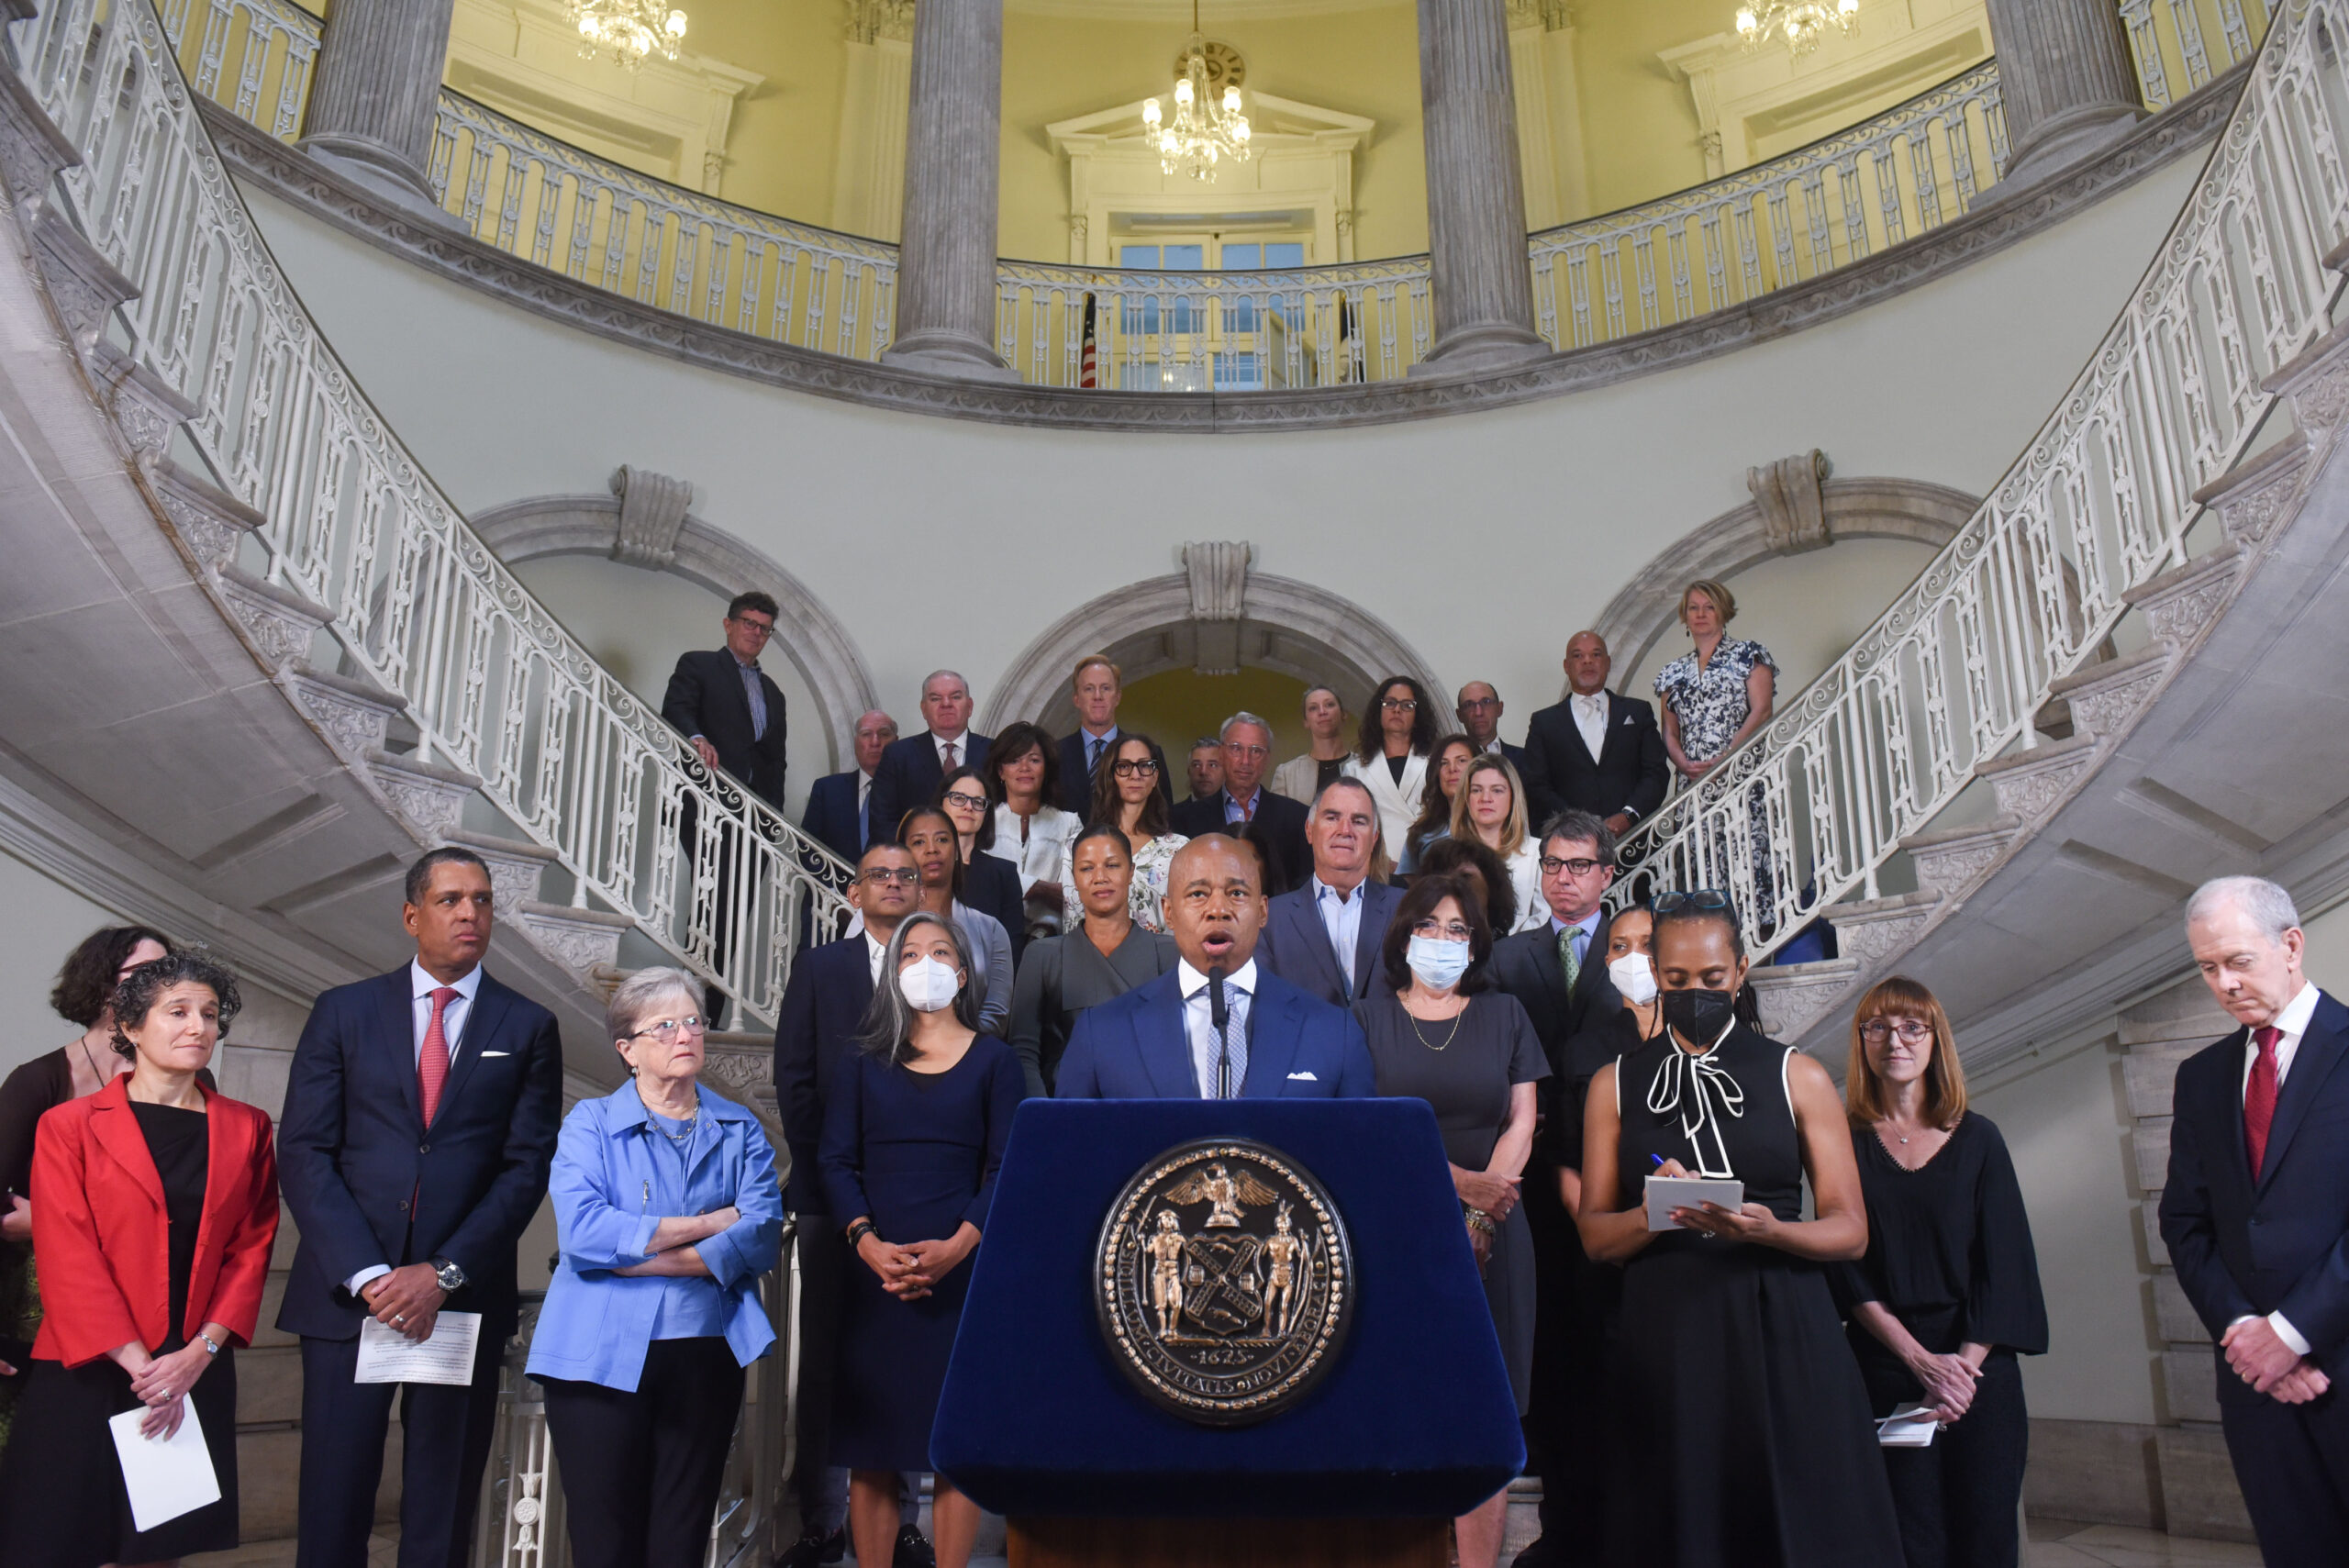 Mayor of New York standing behind podium with group of people behind him